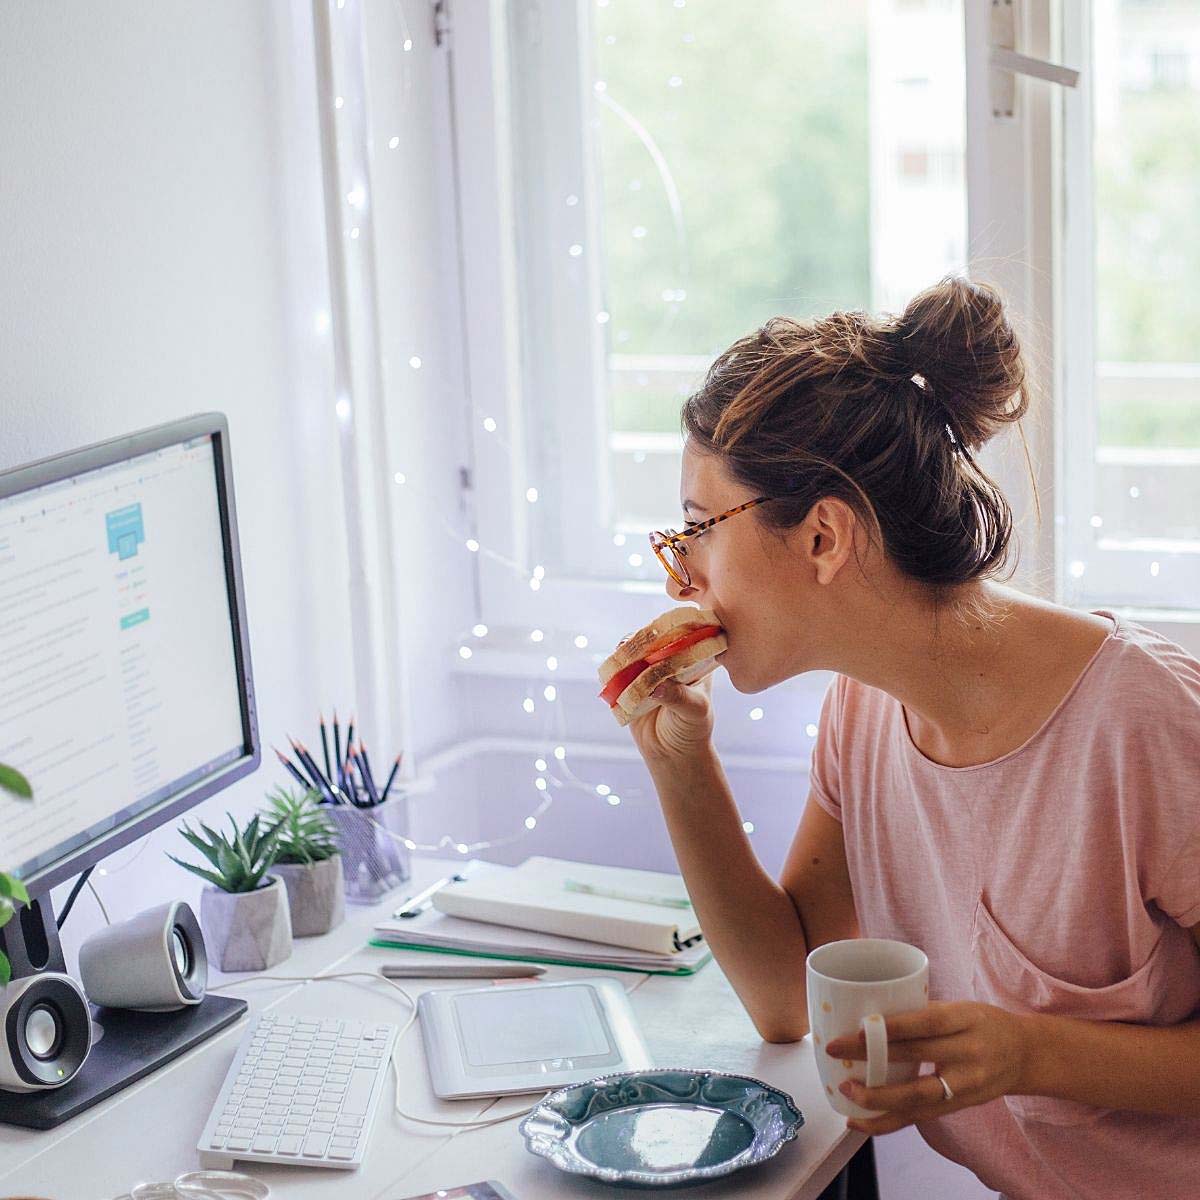 A woman eating a sandwich and reading a blog post on a desktop computer.